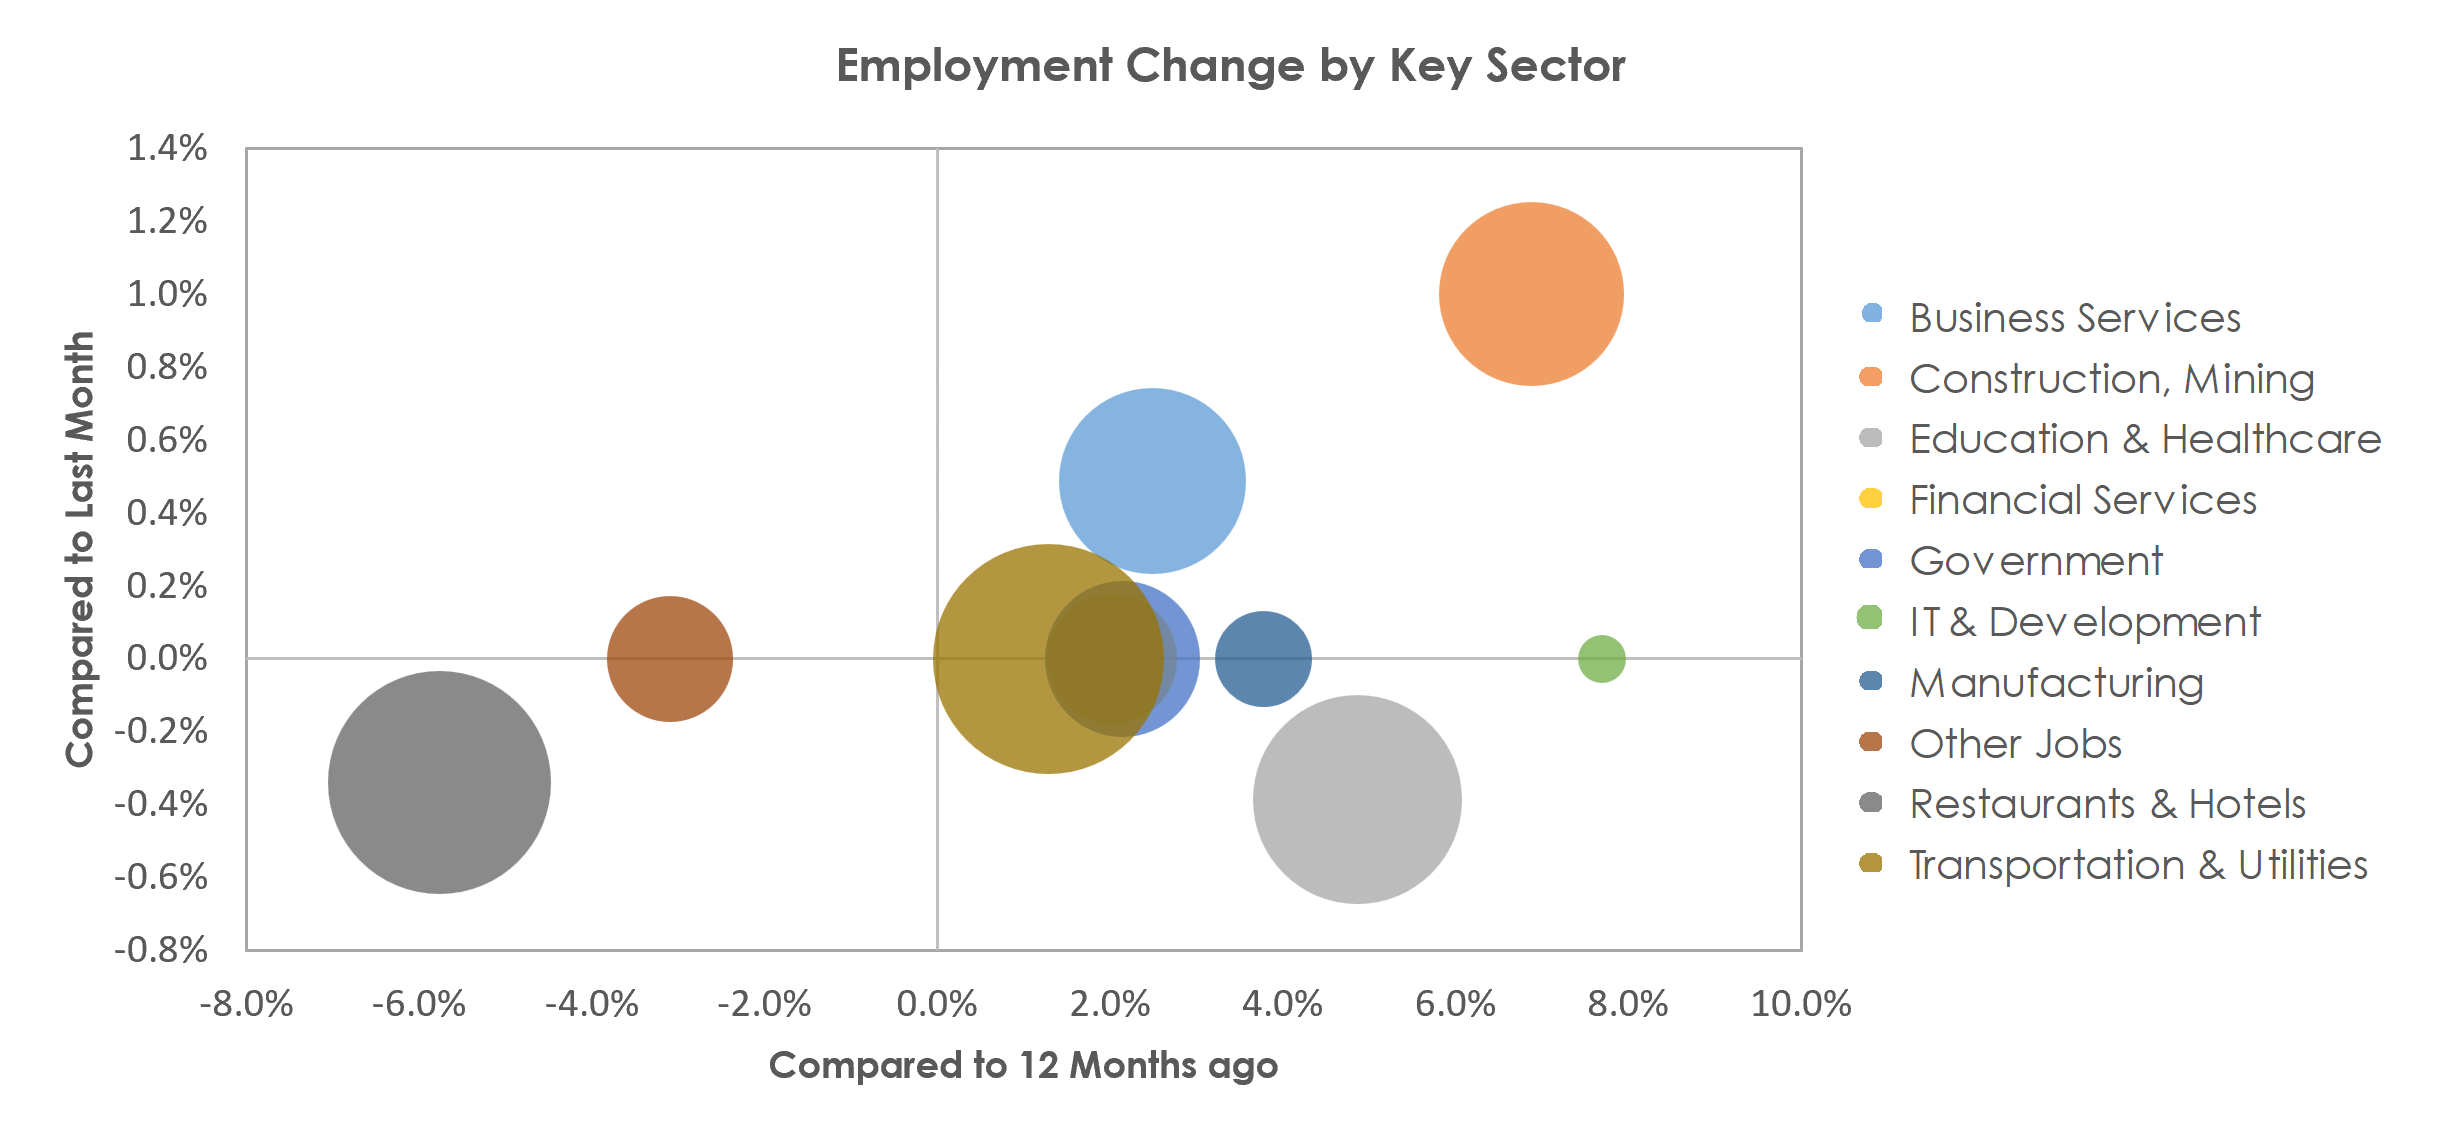 Naples-Immokalee-Marco Island, FL Unemployment by Industry March 2023